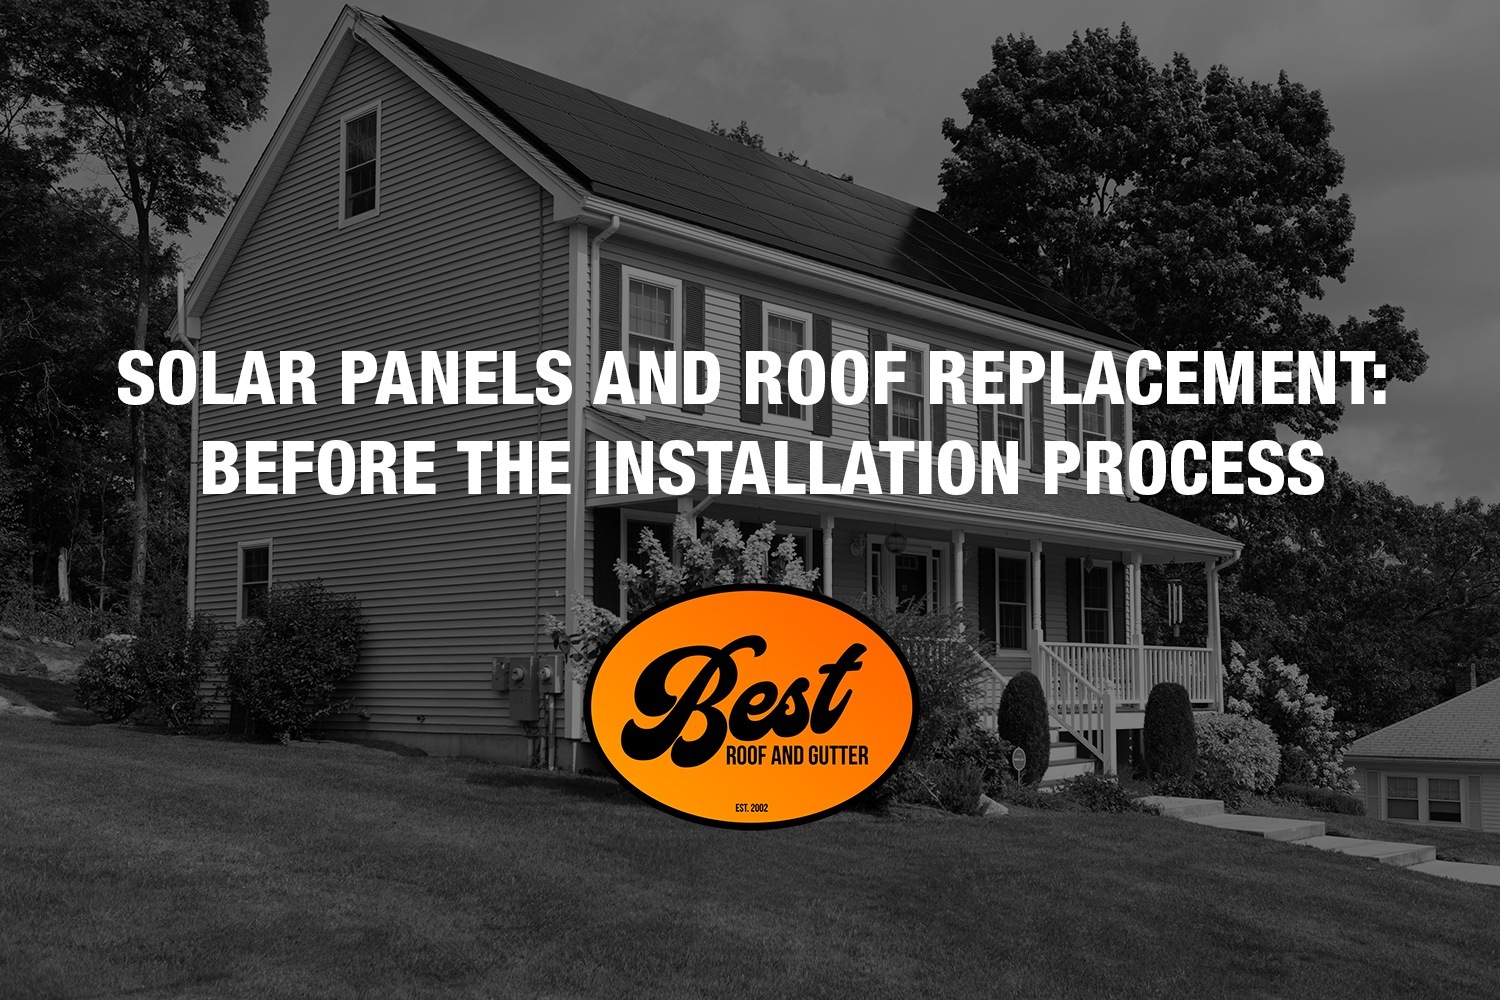 Solar Panels and Roof Replacement: Before the Installation Process